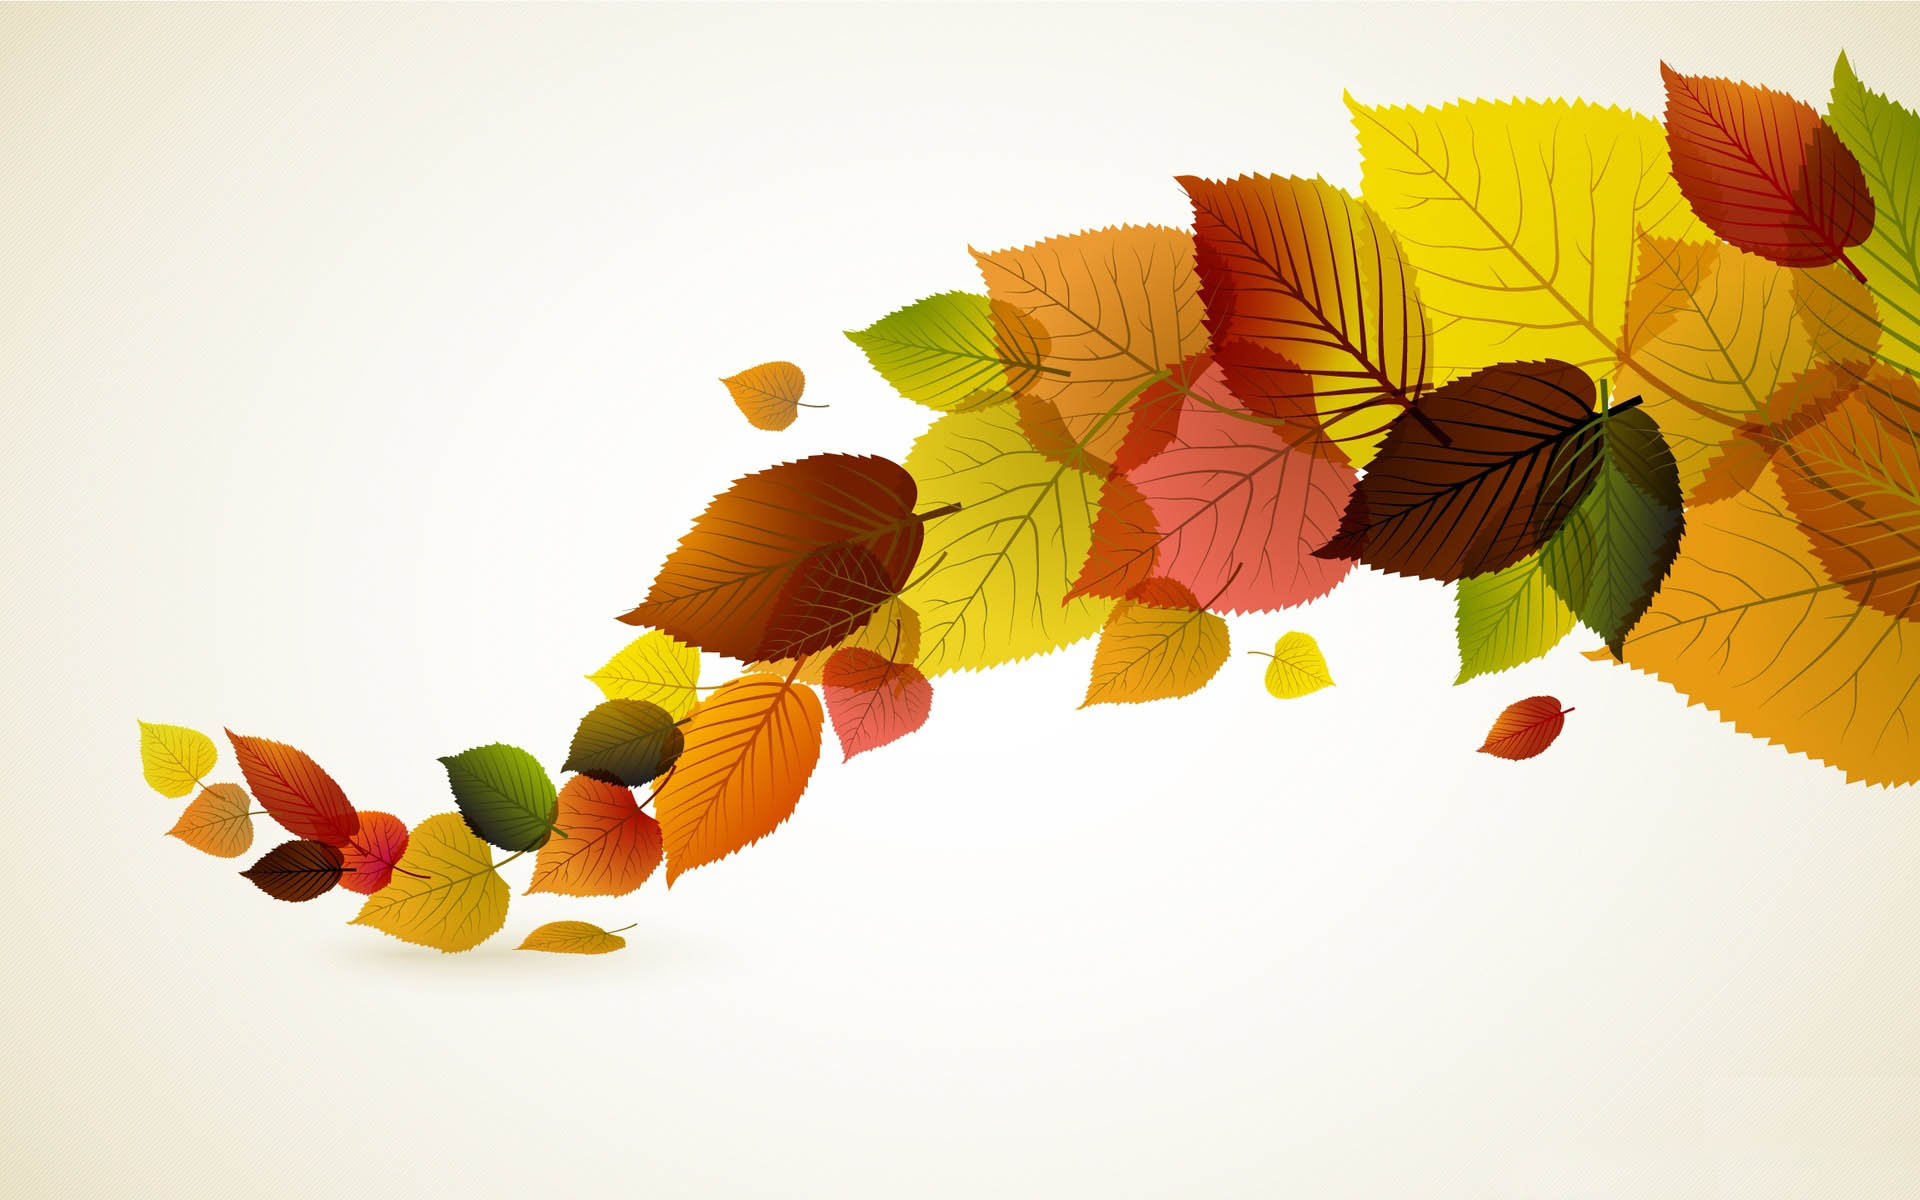 Autumn Leaves Art - Leaves Background Hd , HD Wallpaper & Backgrounds